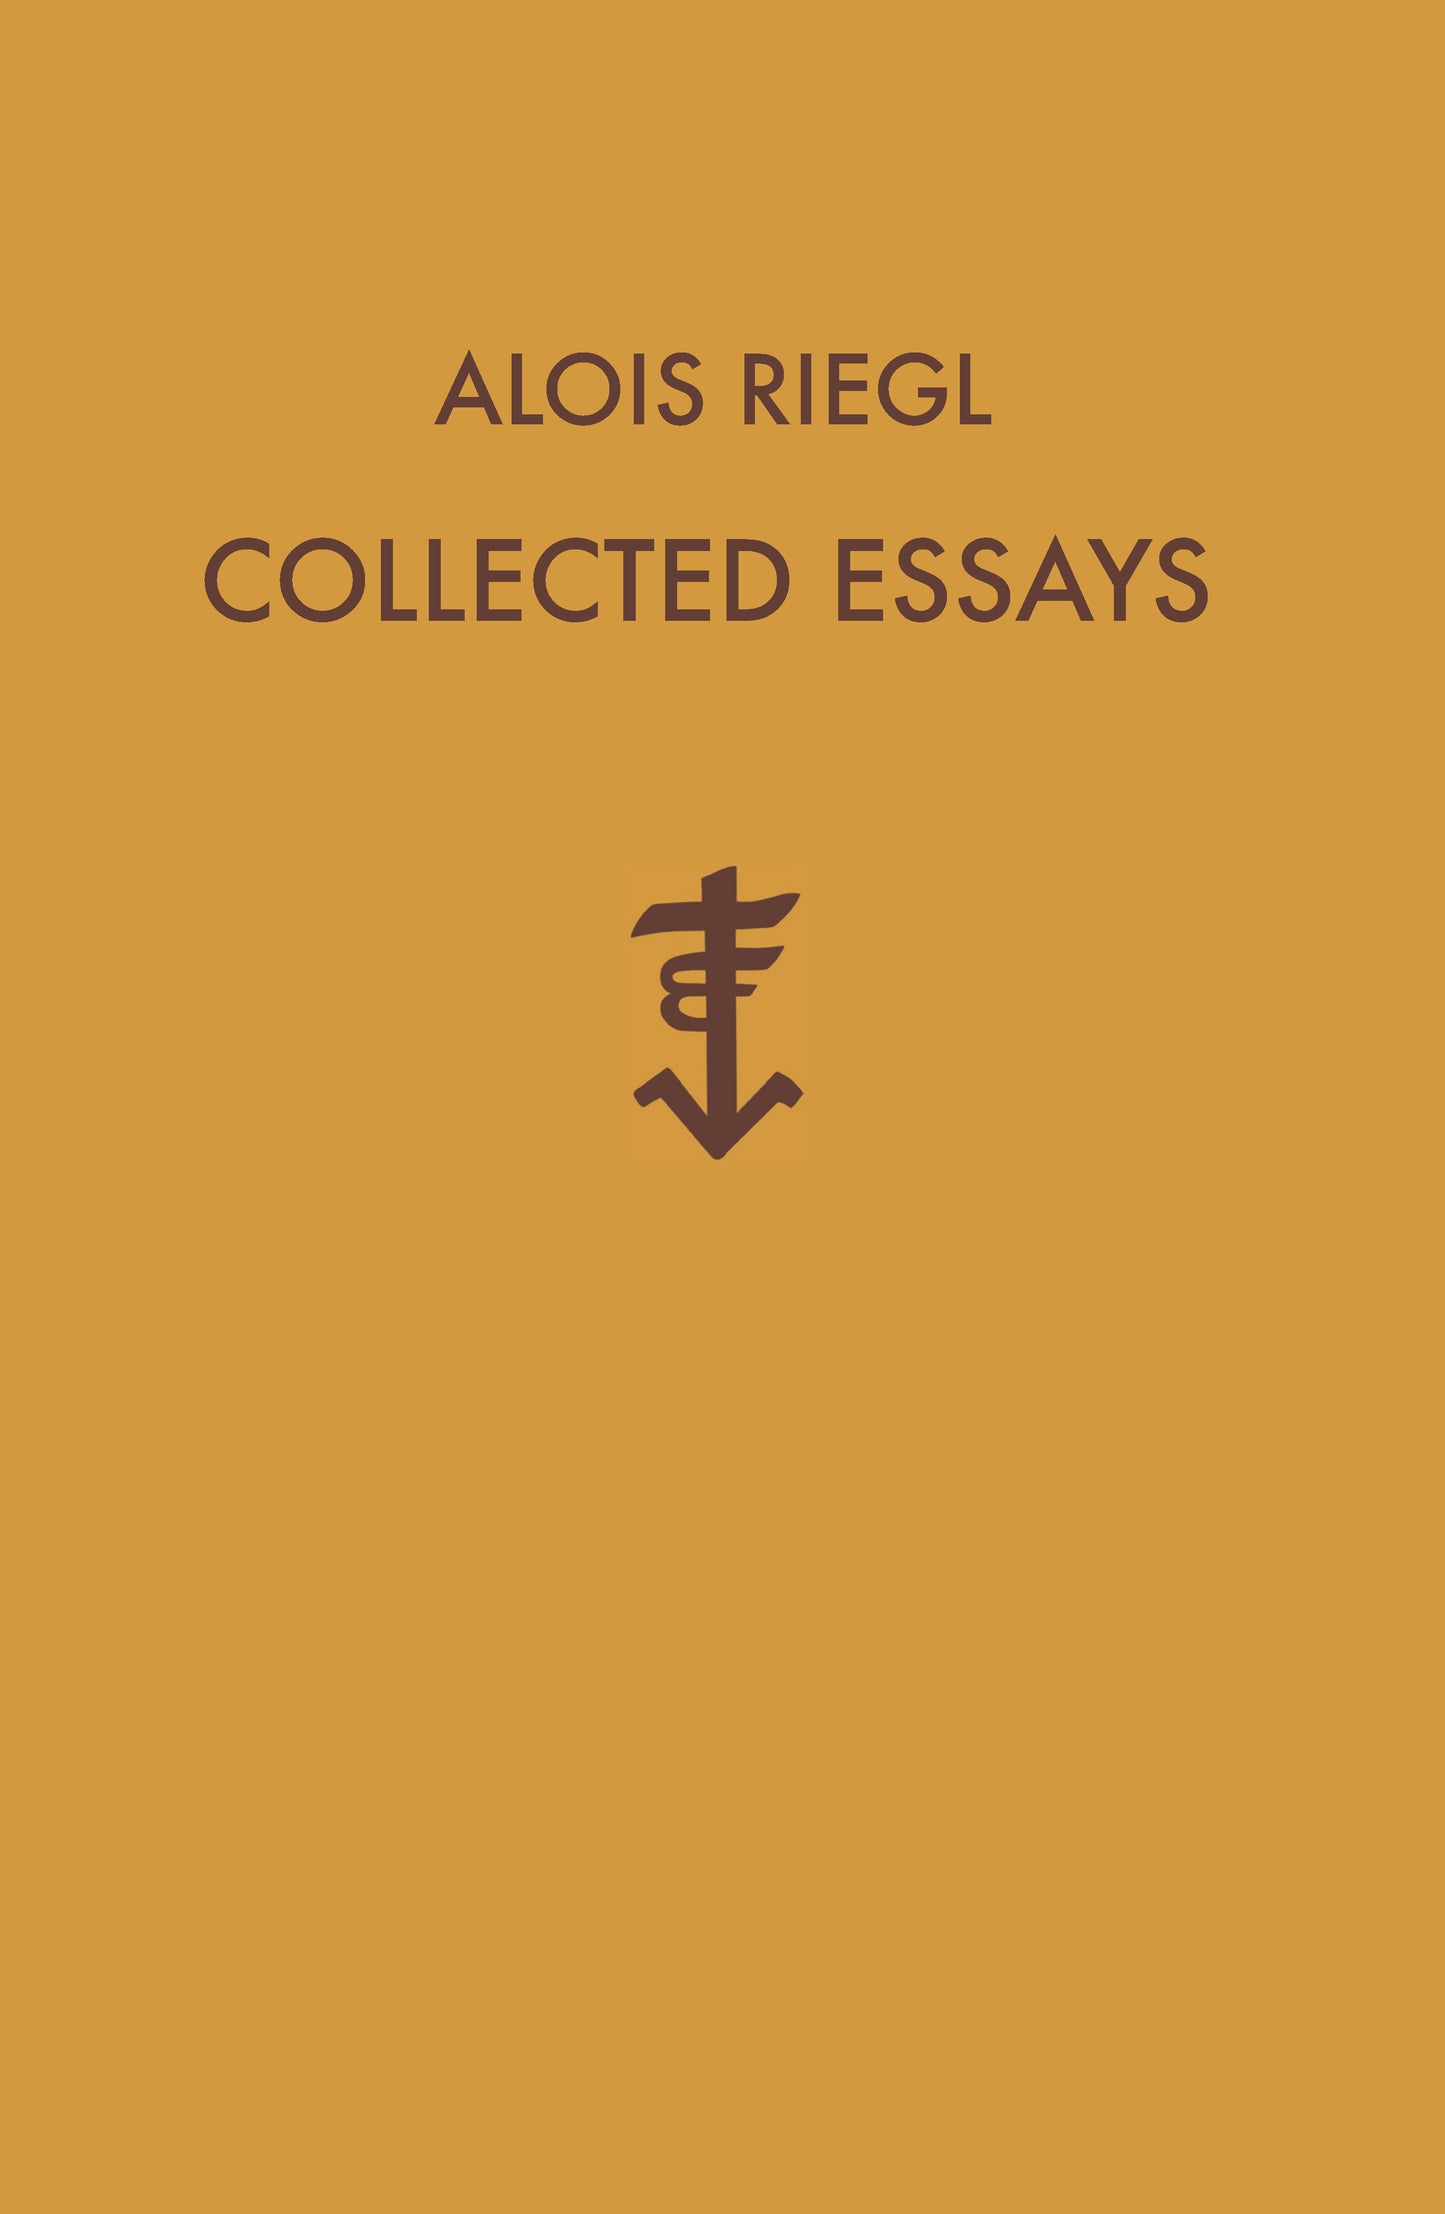 Collected Essays By Alois Riegl, Translated by Karl Johns